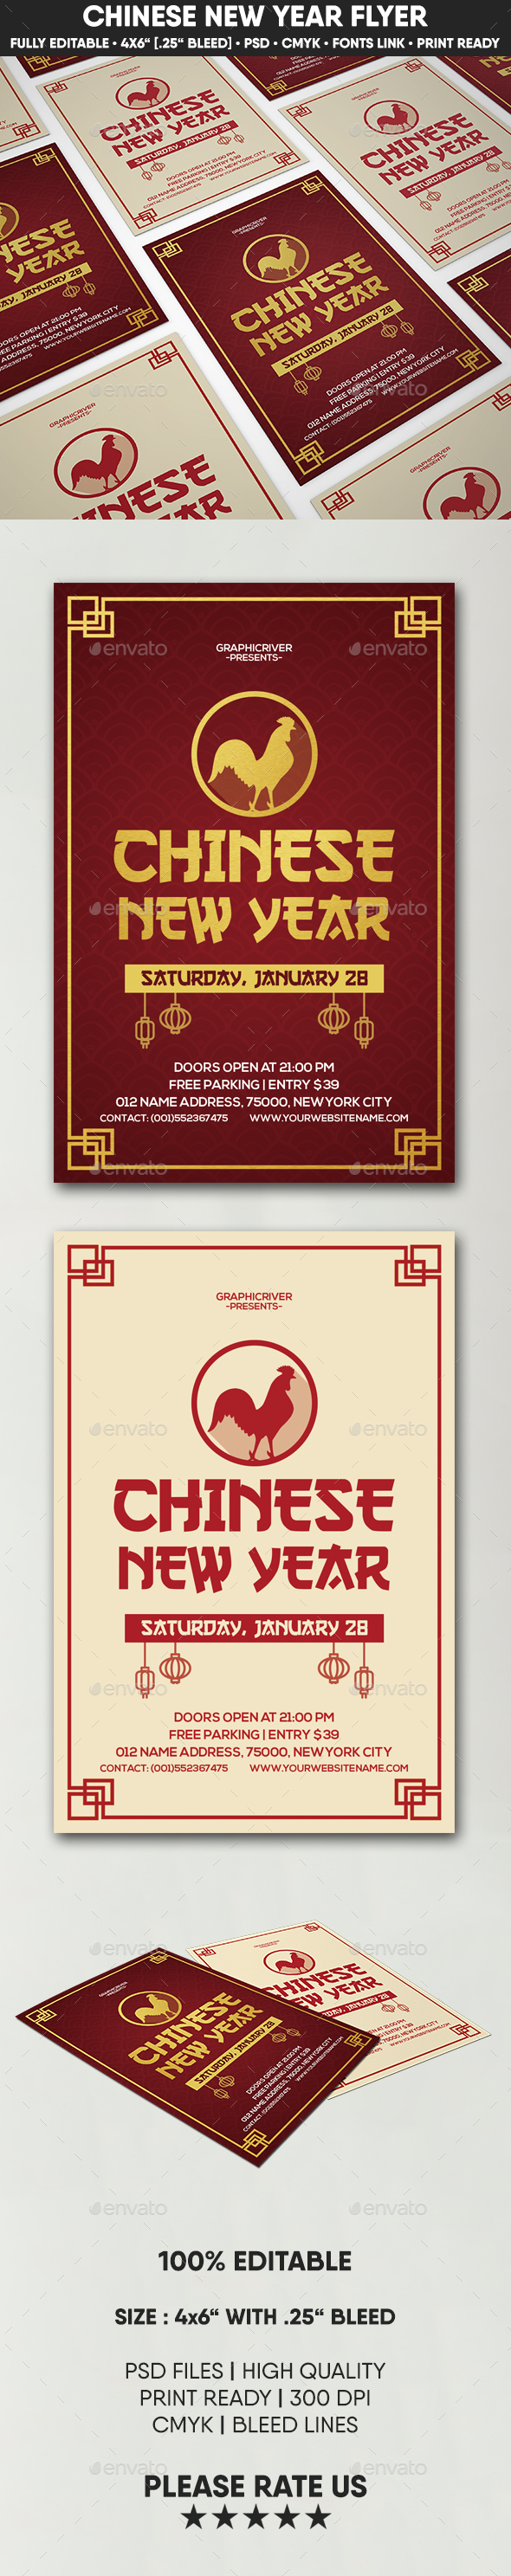 Chinese New Year - Flyer